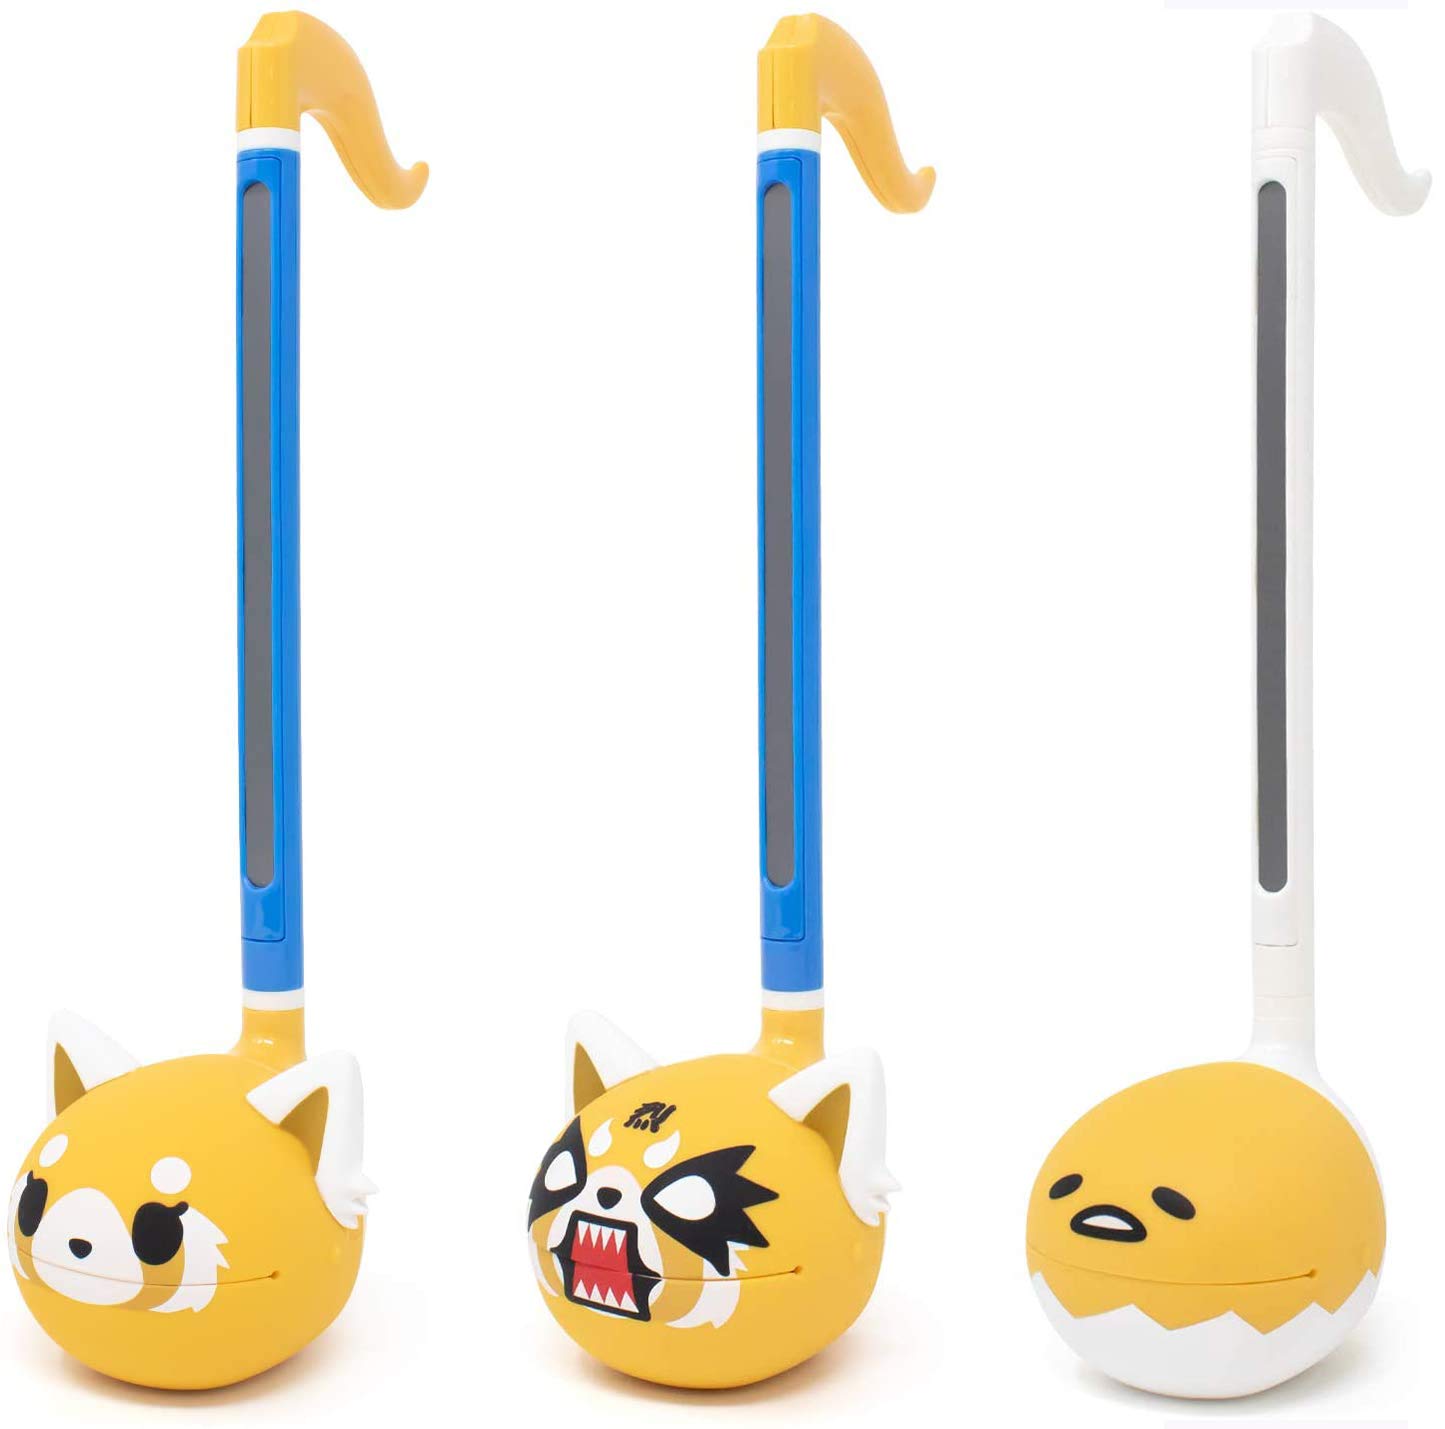 Special Edition Sanrio Otamatone (3 Pc. Set - Aggretsuko Sweet + Rage + Gudetama) - Electronic Musical Toy Instrument by Maywa Denki (Official Licensed) [Includes Song Sheet and English Instructions]